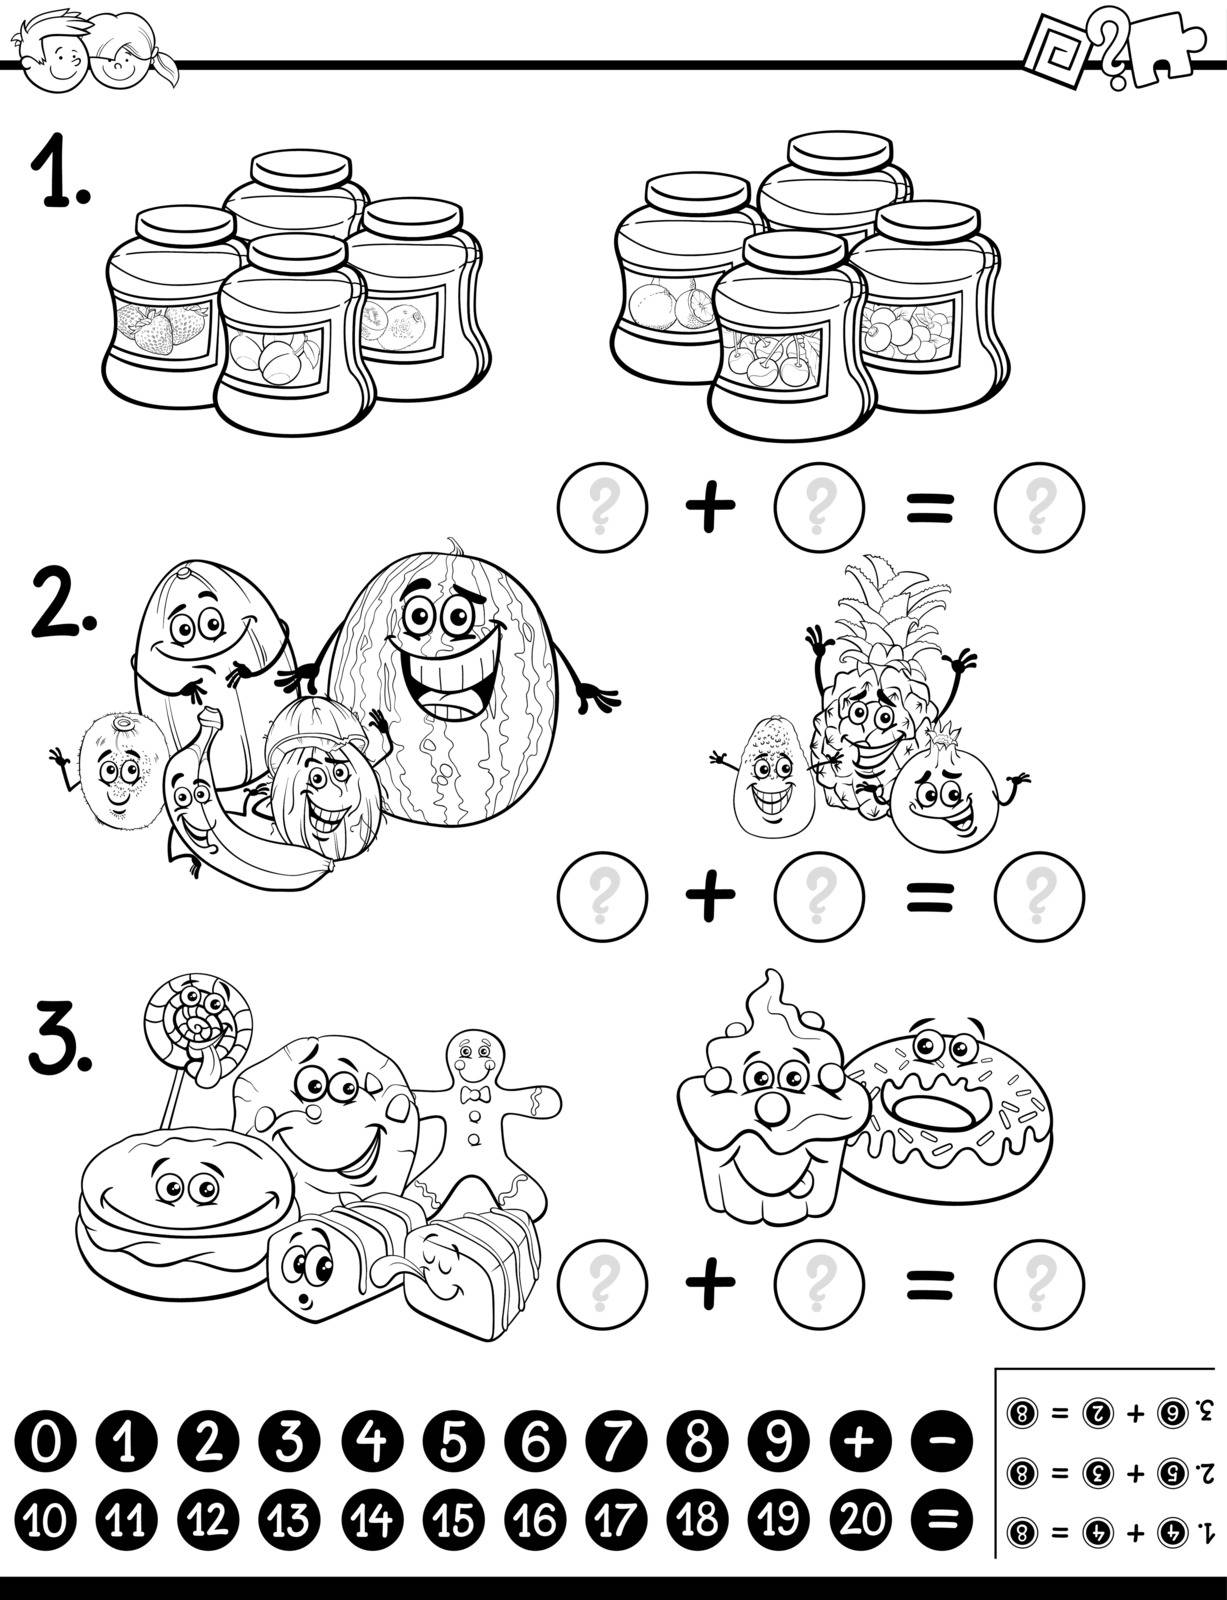 Black and White Cartoon Illustration of Educational Mathematical Activity for Children with Food Objects Coloring Page